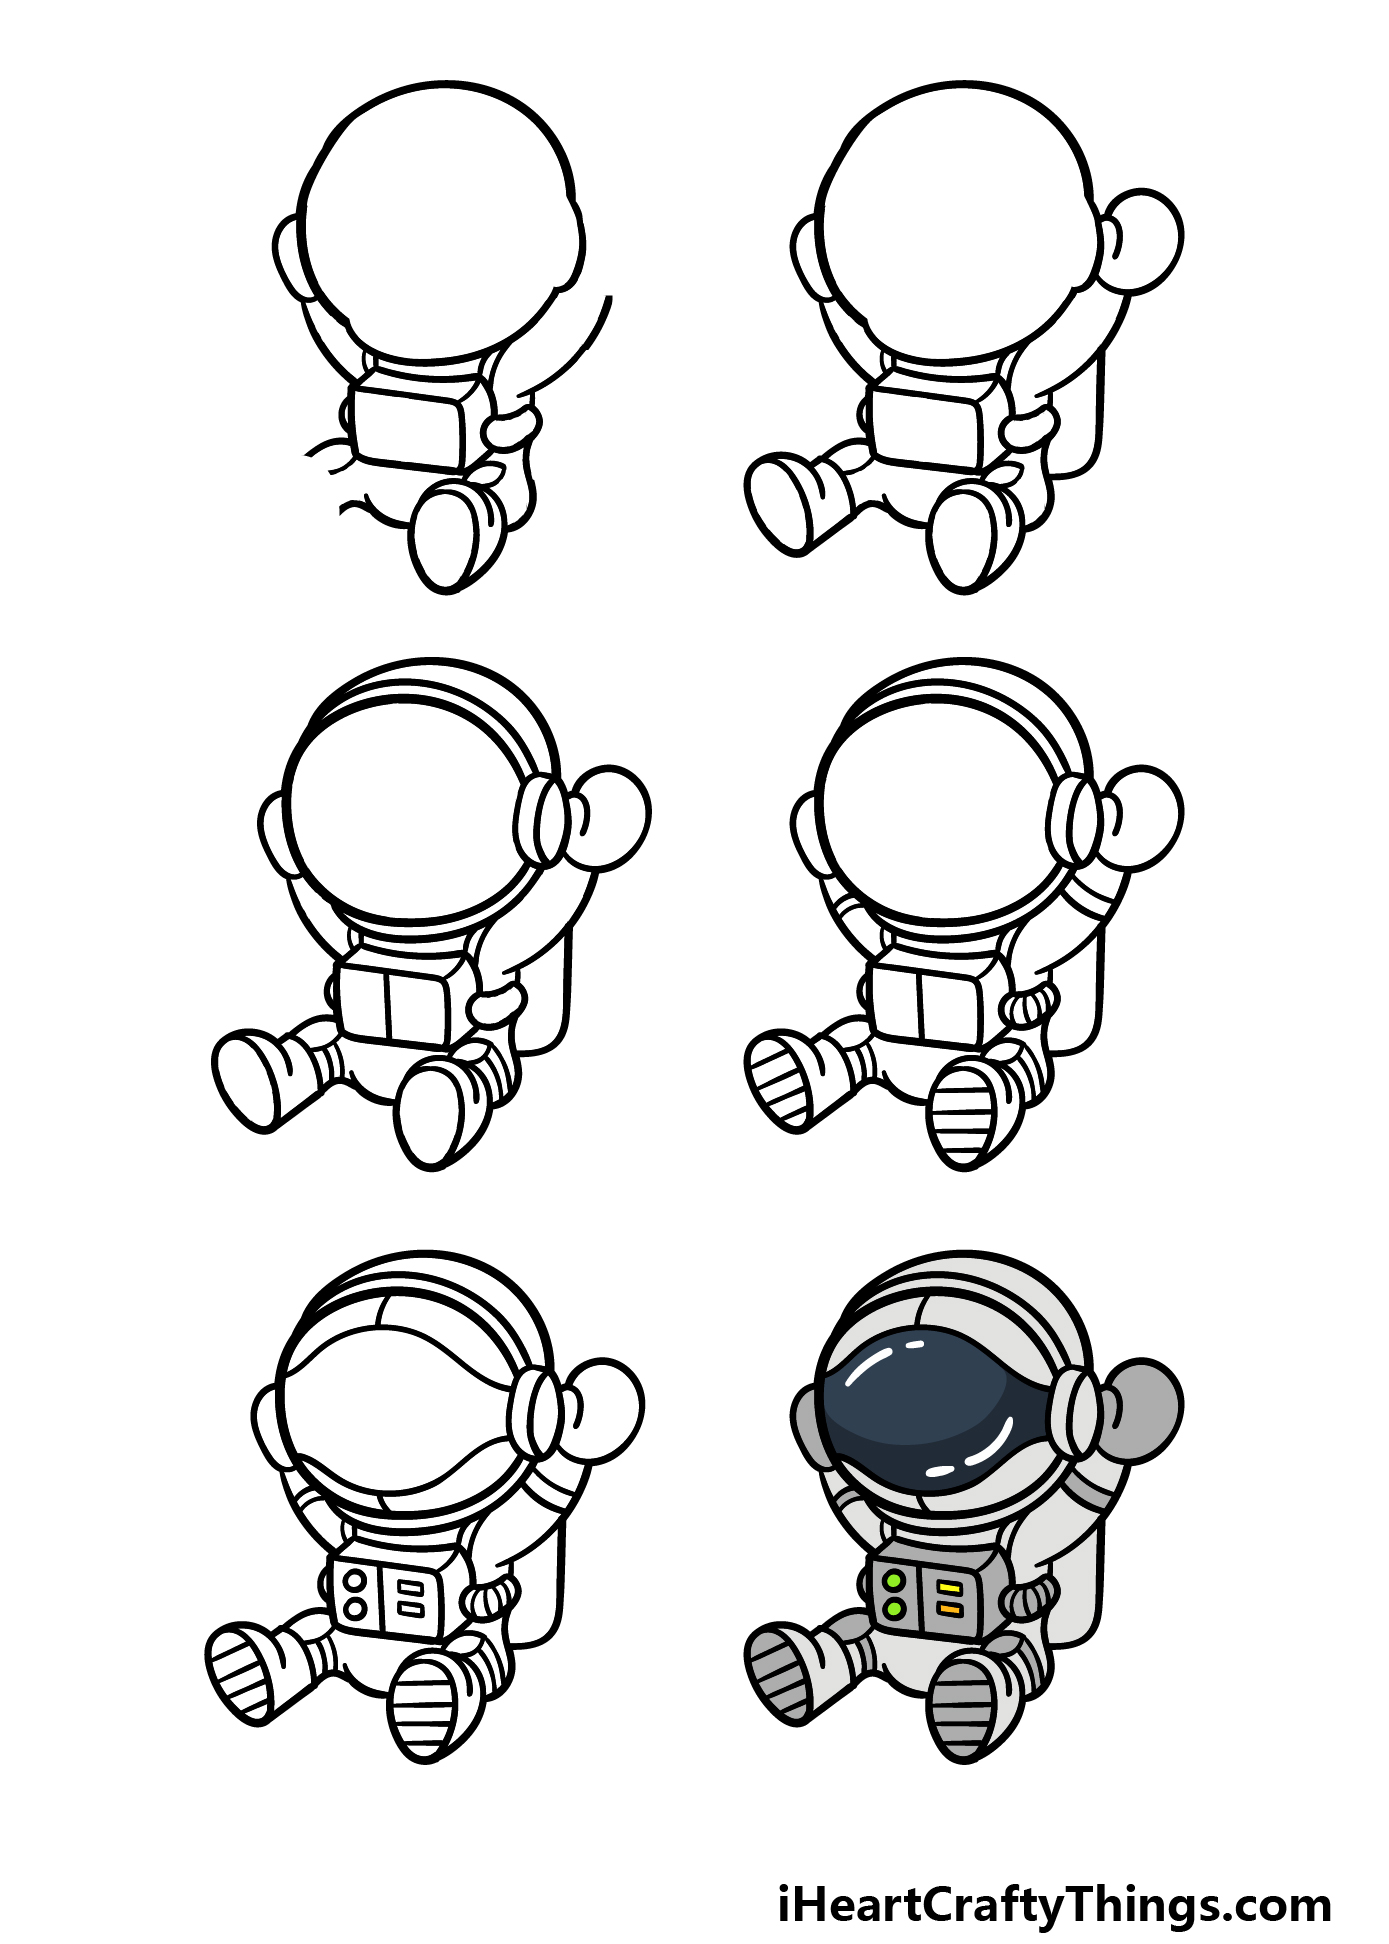 Cartoon Astronaut Drawing - How To Draw A Cartoon Astronaut Step By Step!